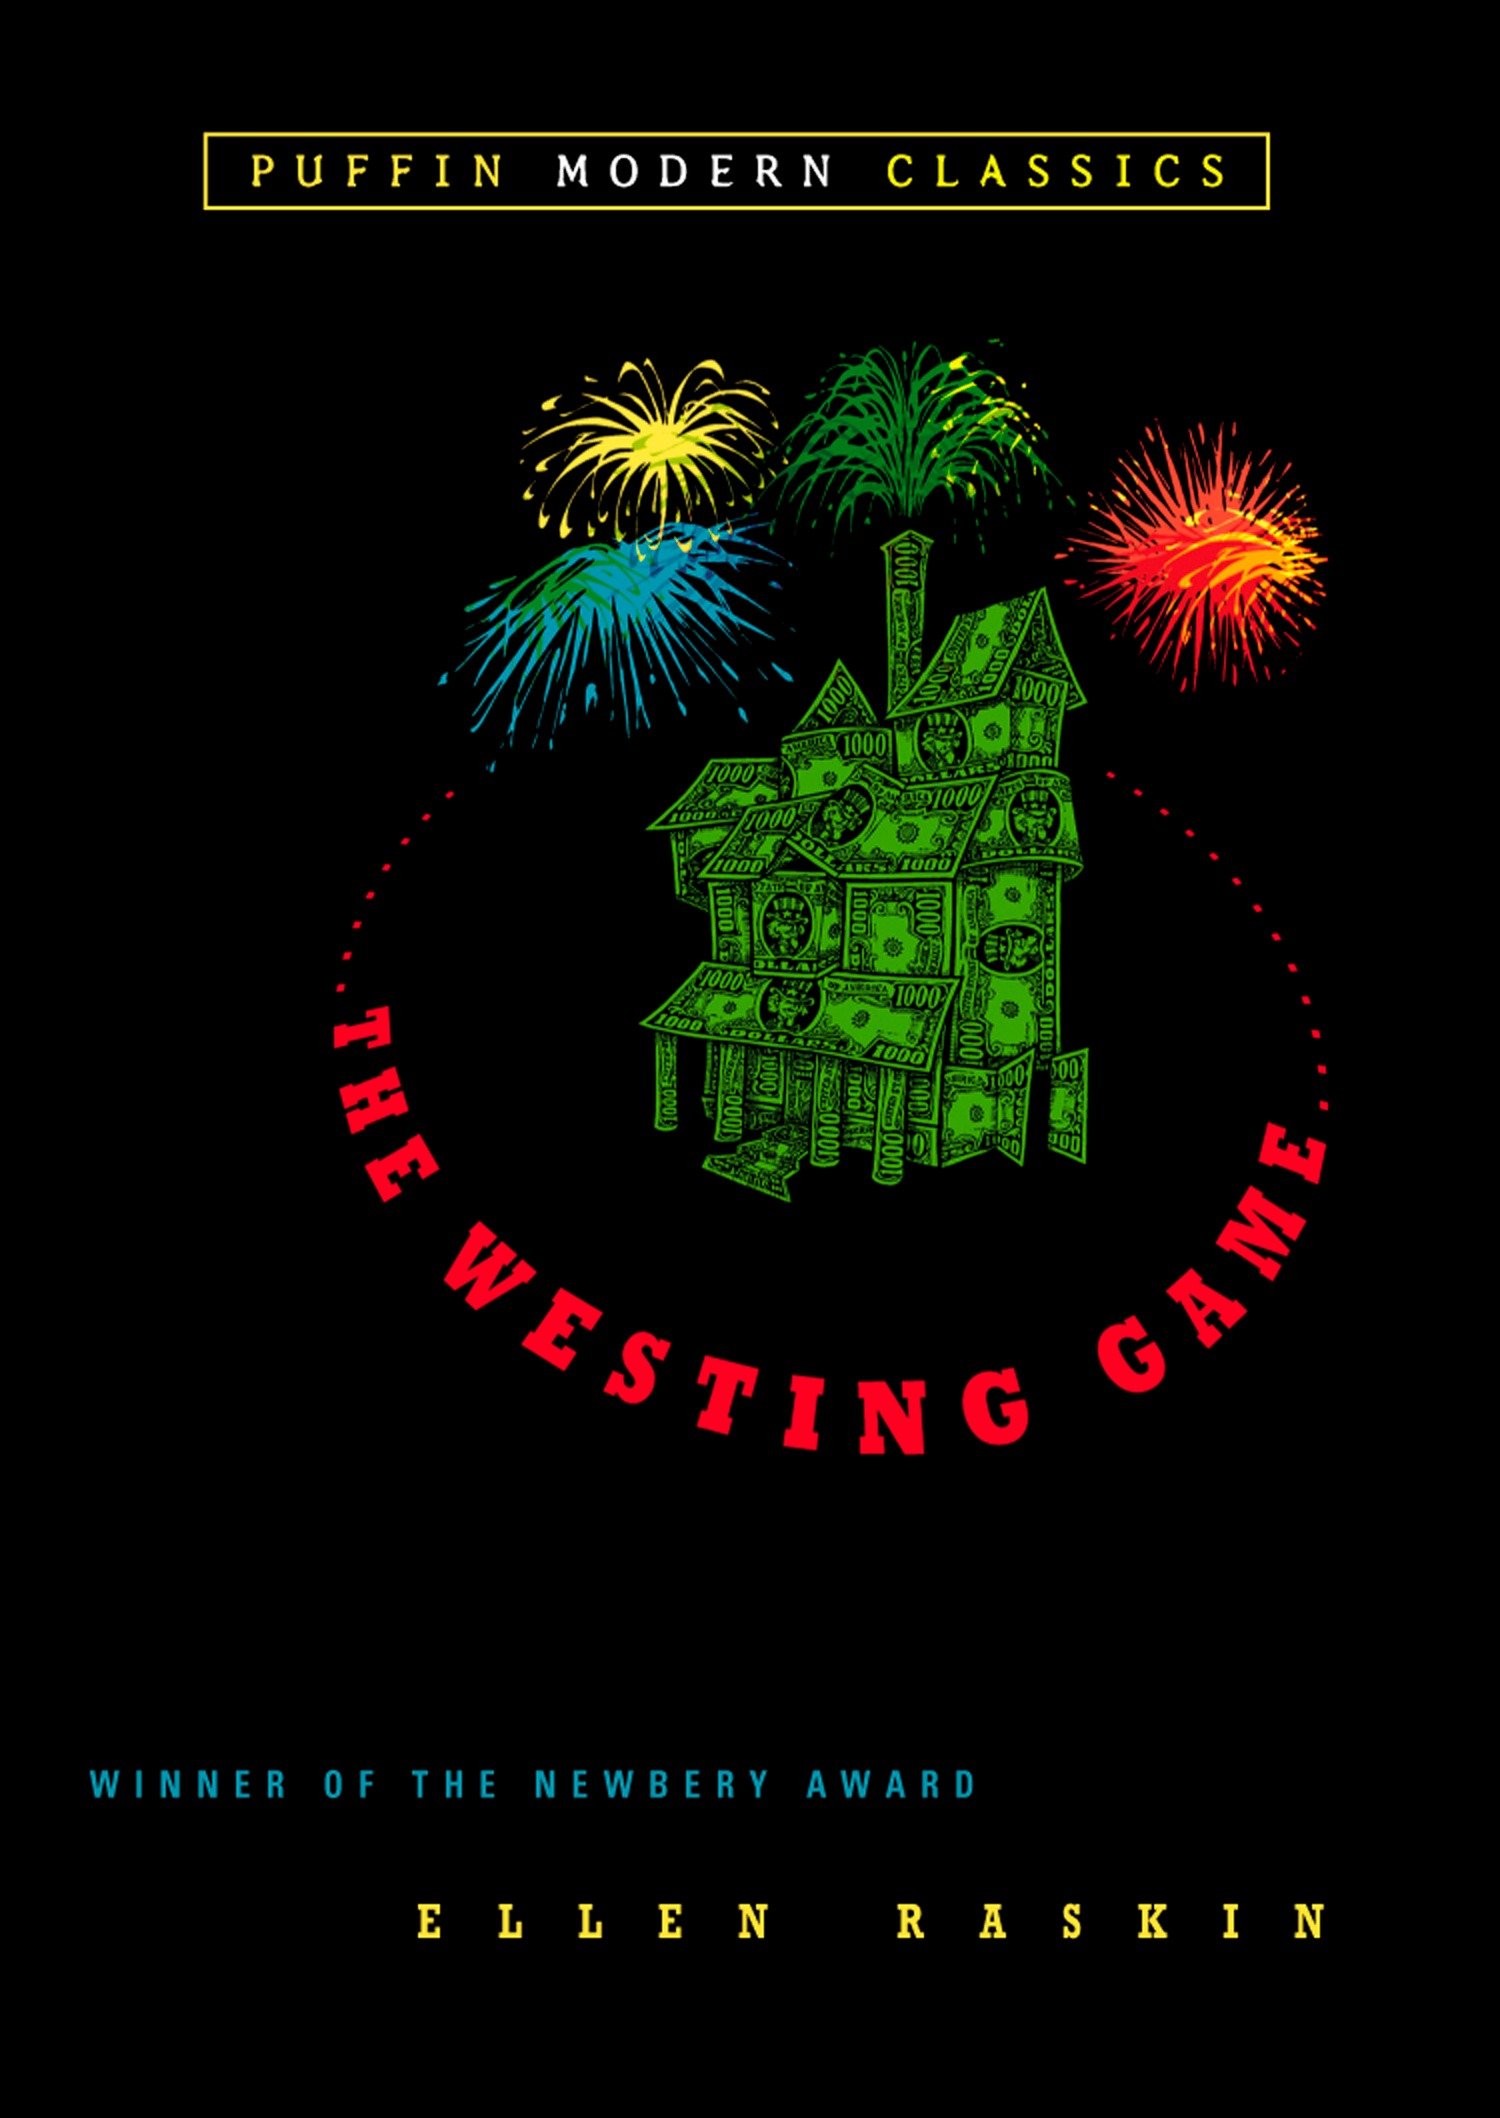 The westing game cover image